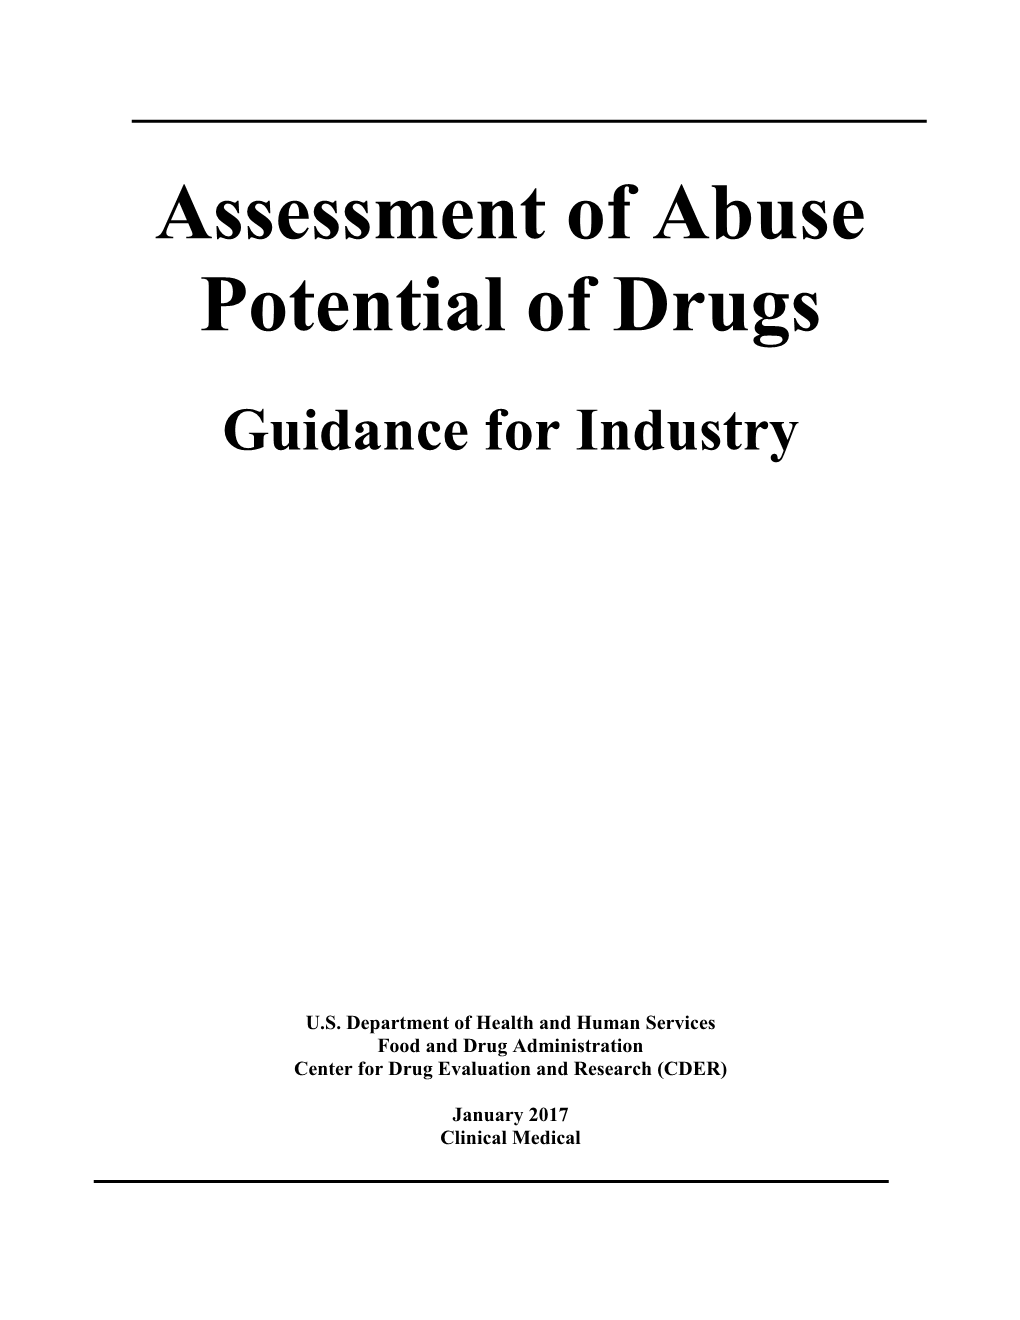 Assessment of Abuse Potential of Drugs Guidance for Industry1